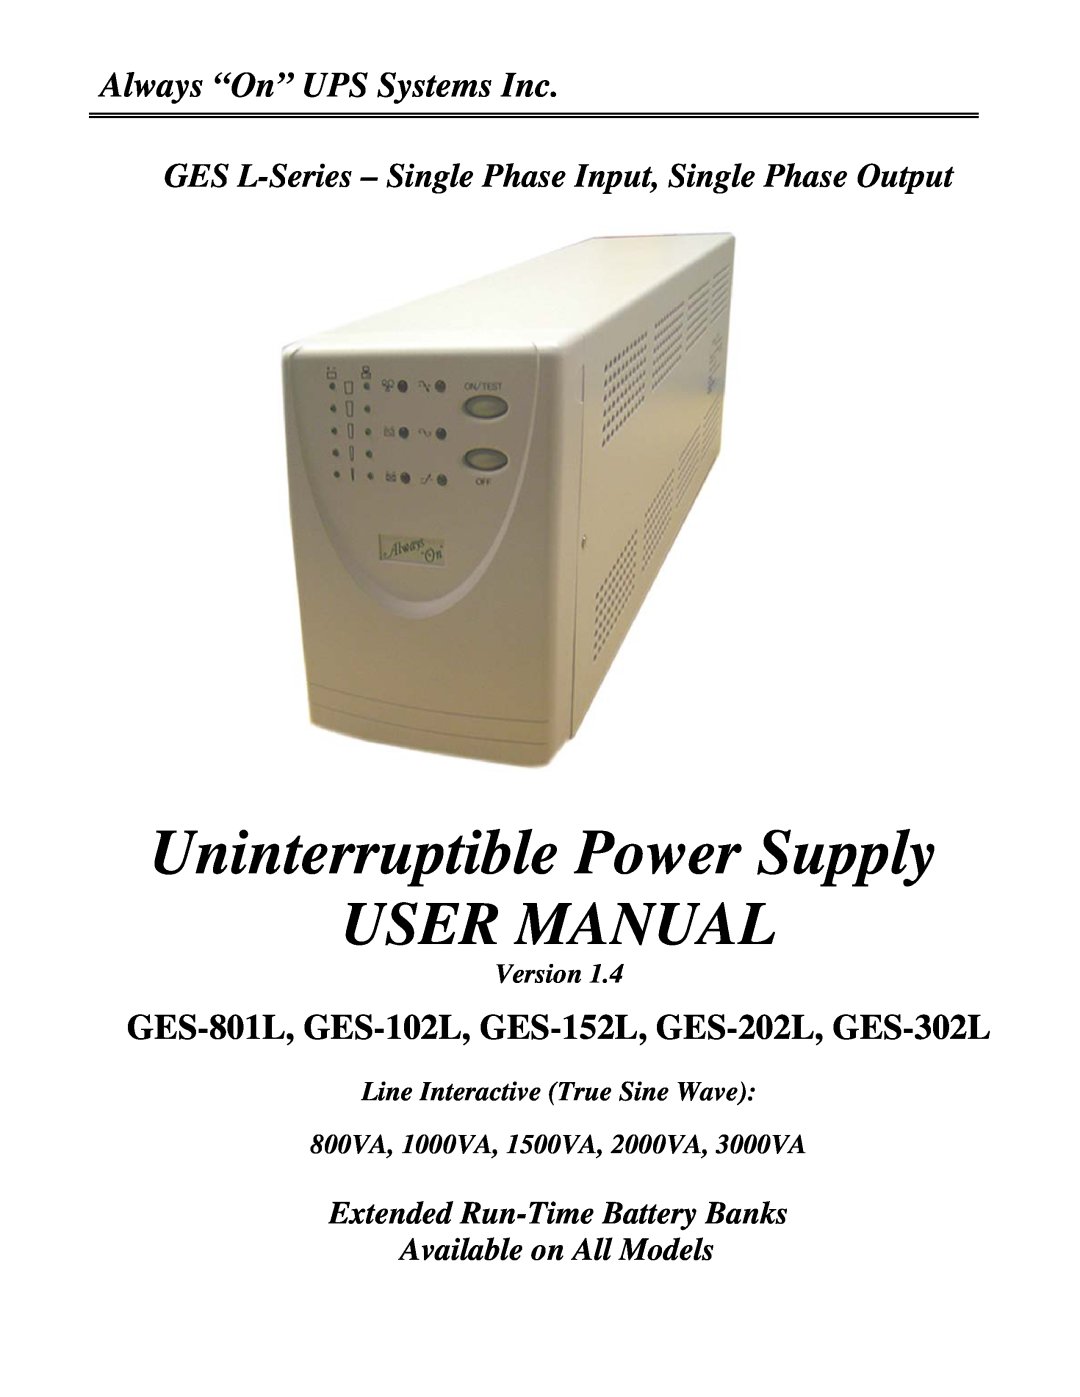 MGE UPS Systems GES-152L user manual Always “On” UPS Systems Inc, Uninterruptible Power Supply, User Manual, Version 